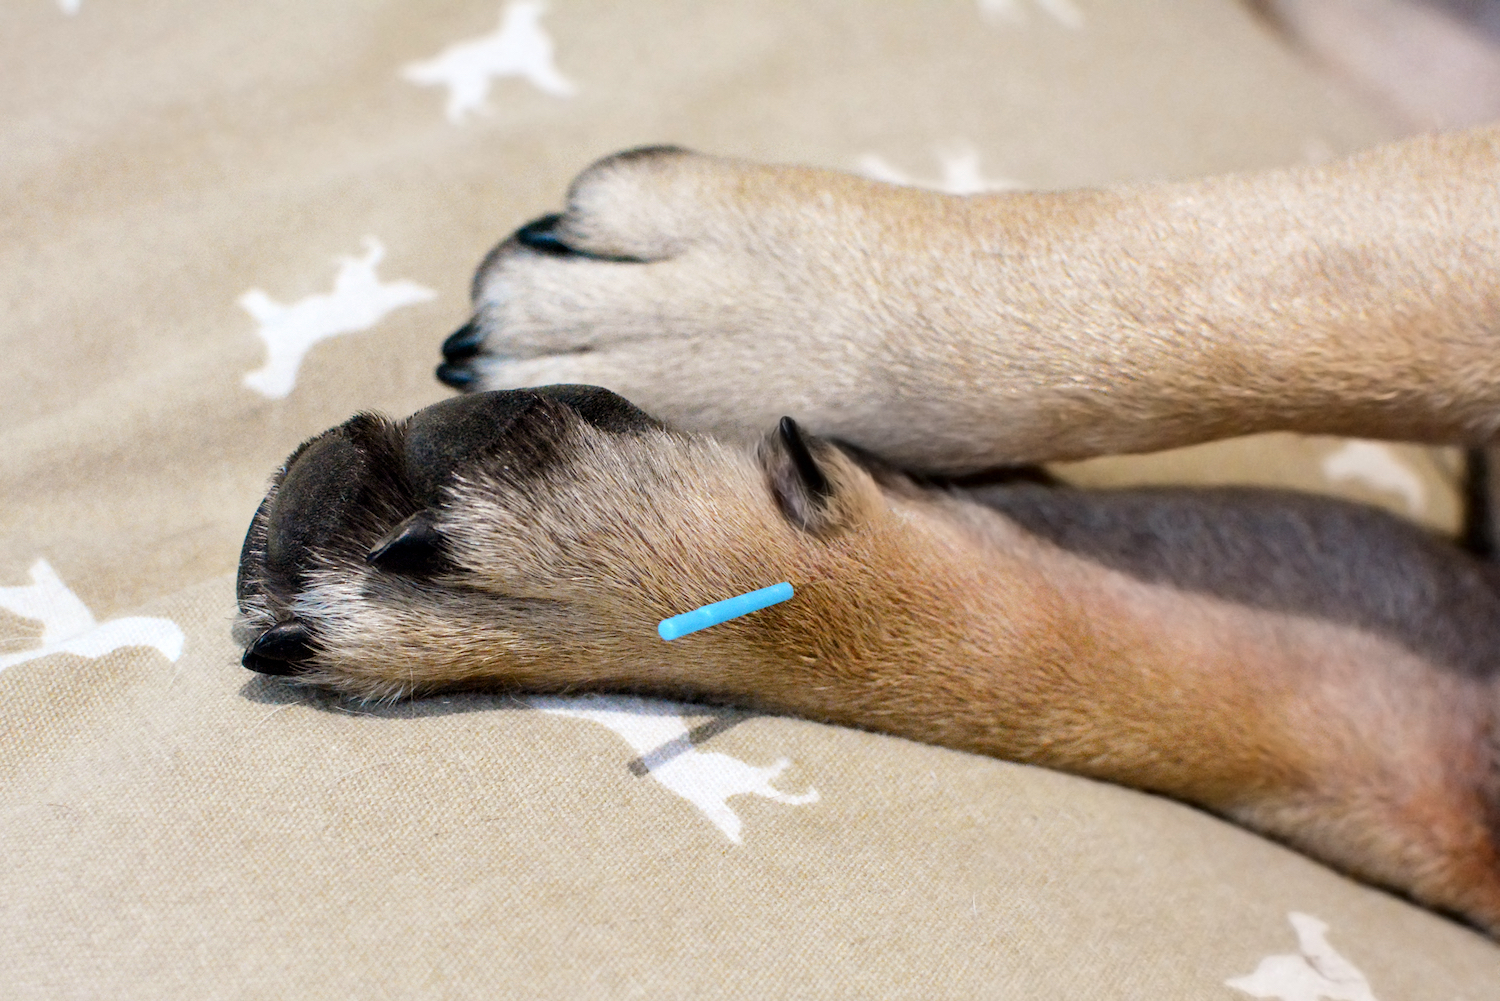 Single,Long,Blue,Acupuncture,Needles,Sticking,In,Paw,Of,Dog